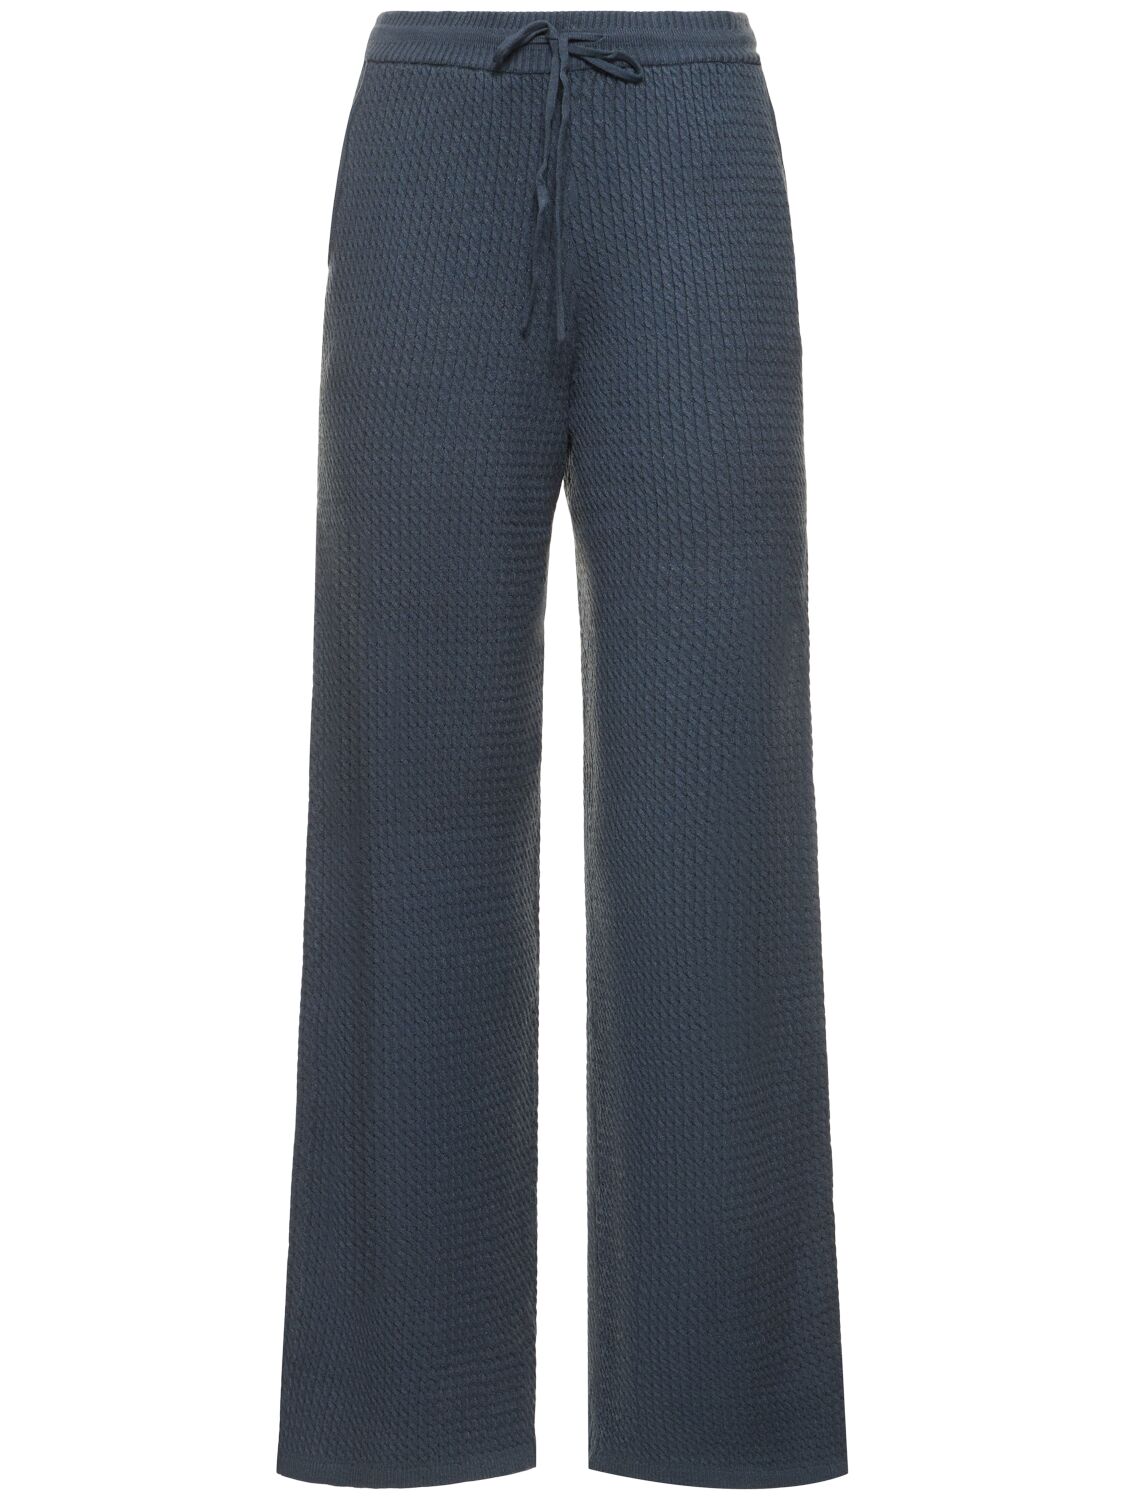 Weworewhat Pull On Knit Viscose Blend Trousers In Dark Grey